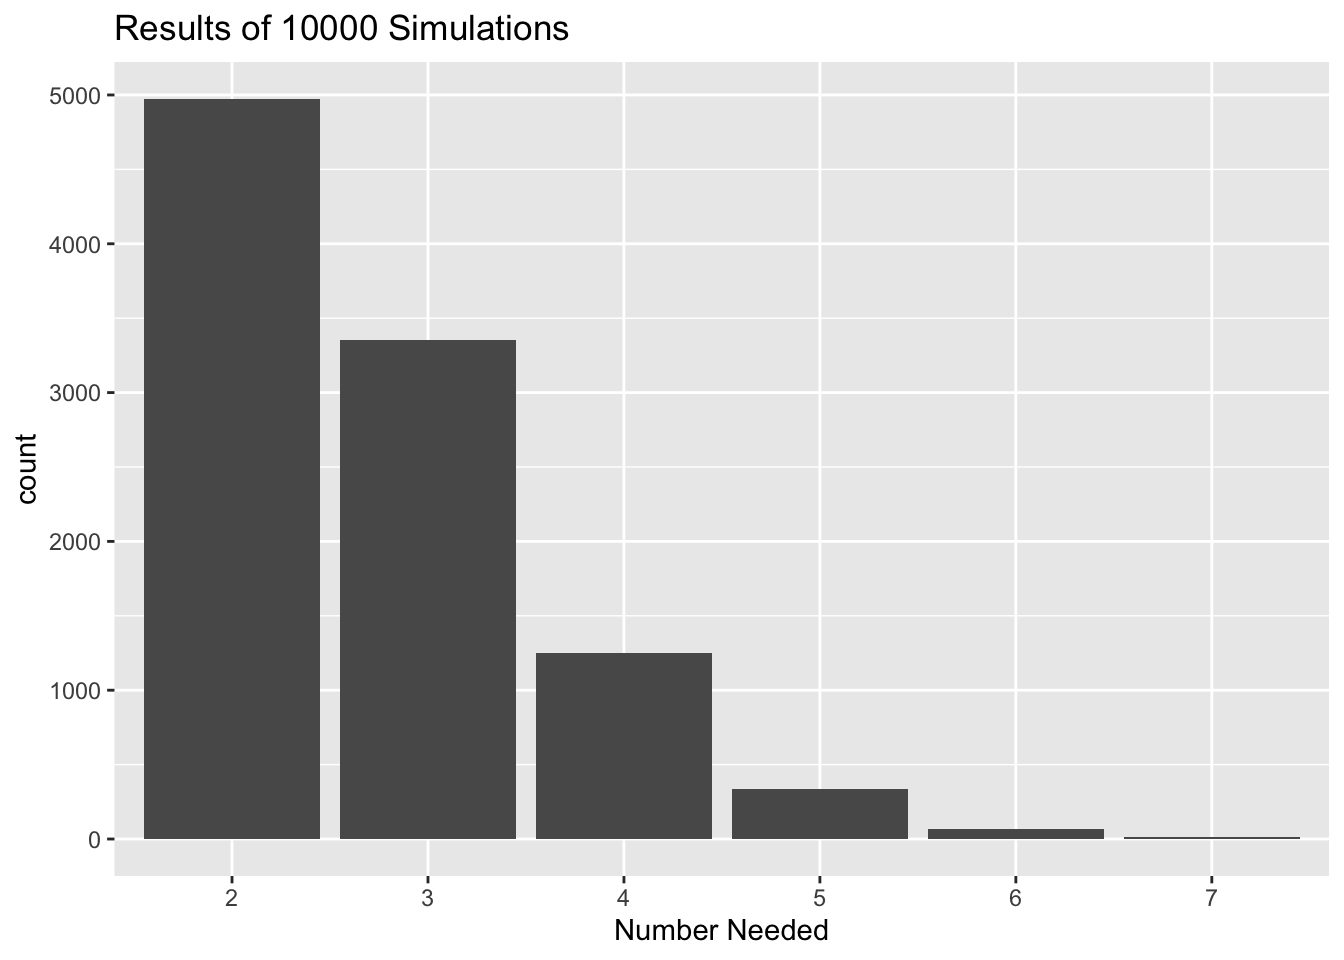 Results of the Number-Needed simulation.